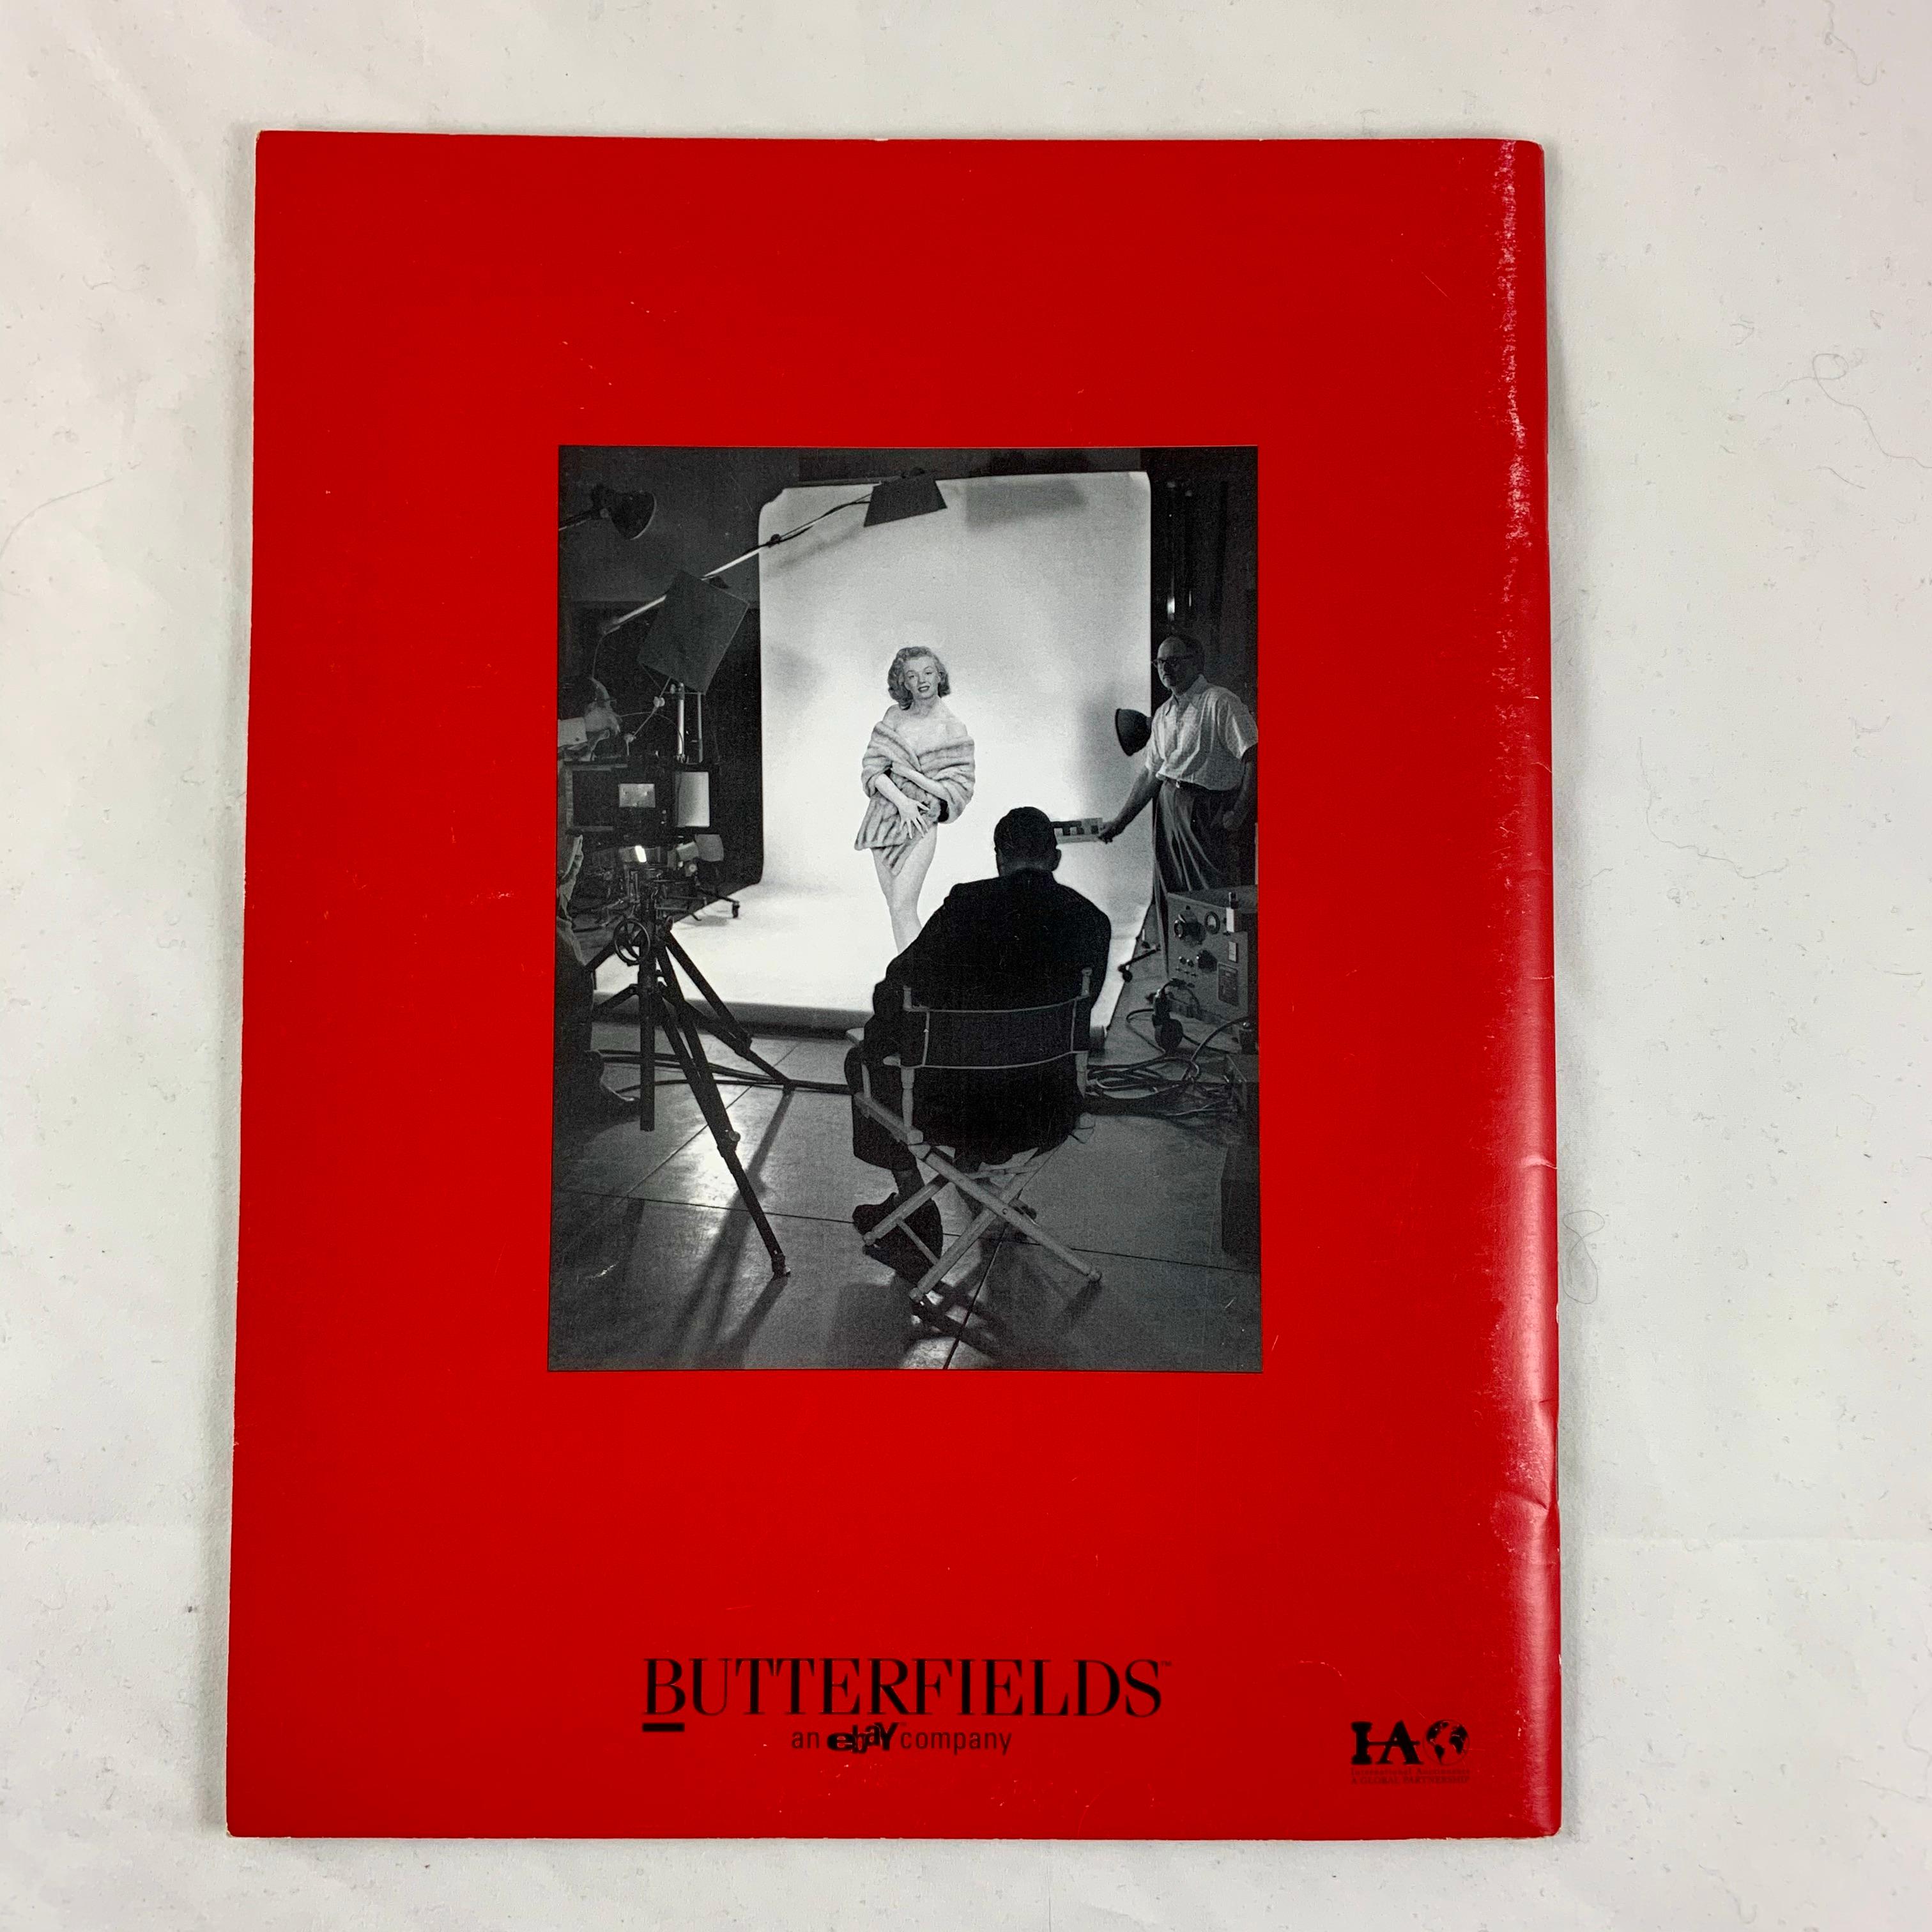 Paper Butterfields Auction Catalogue, Marilyn Monroe, The Red Velvet Images, 2001